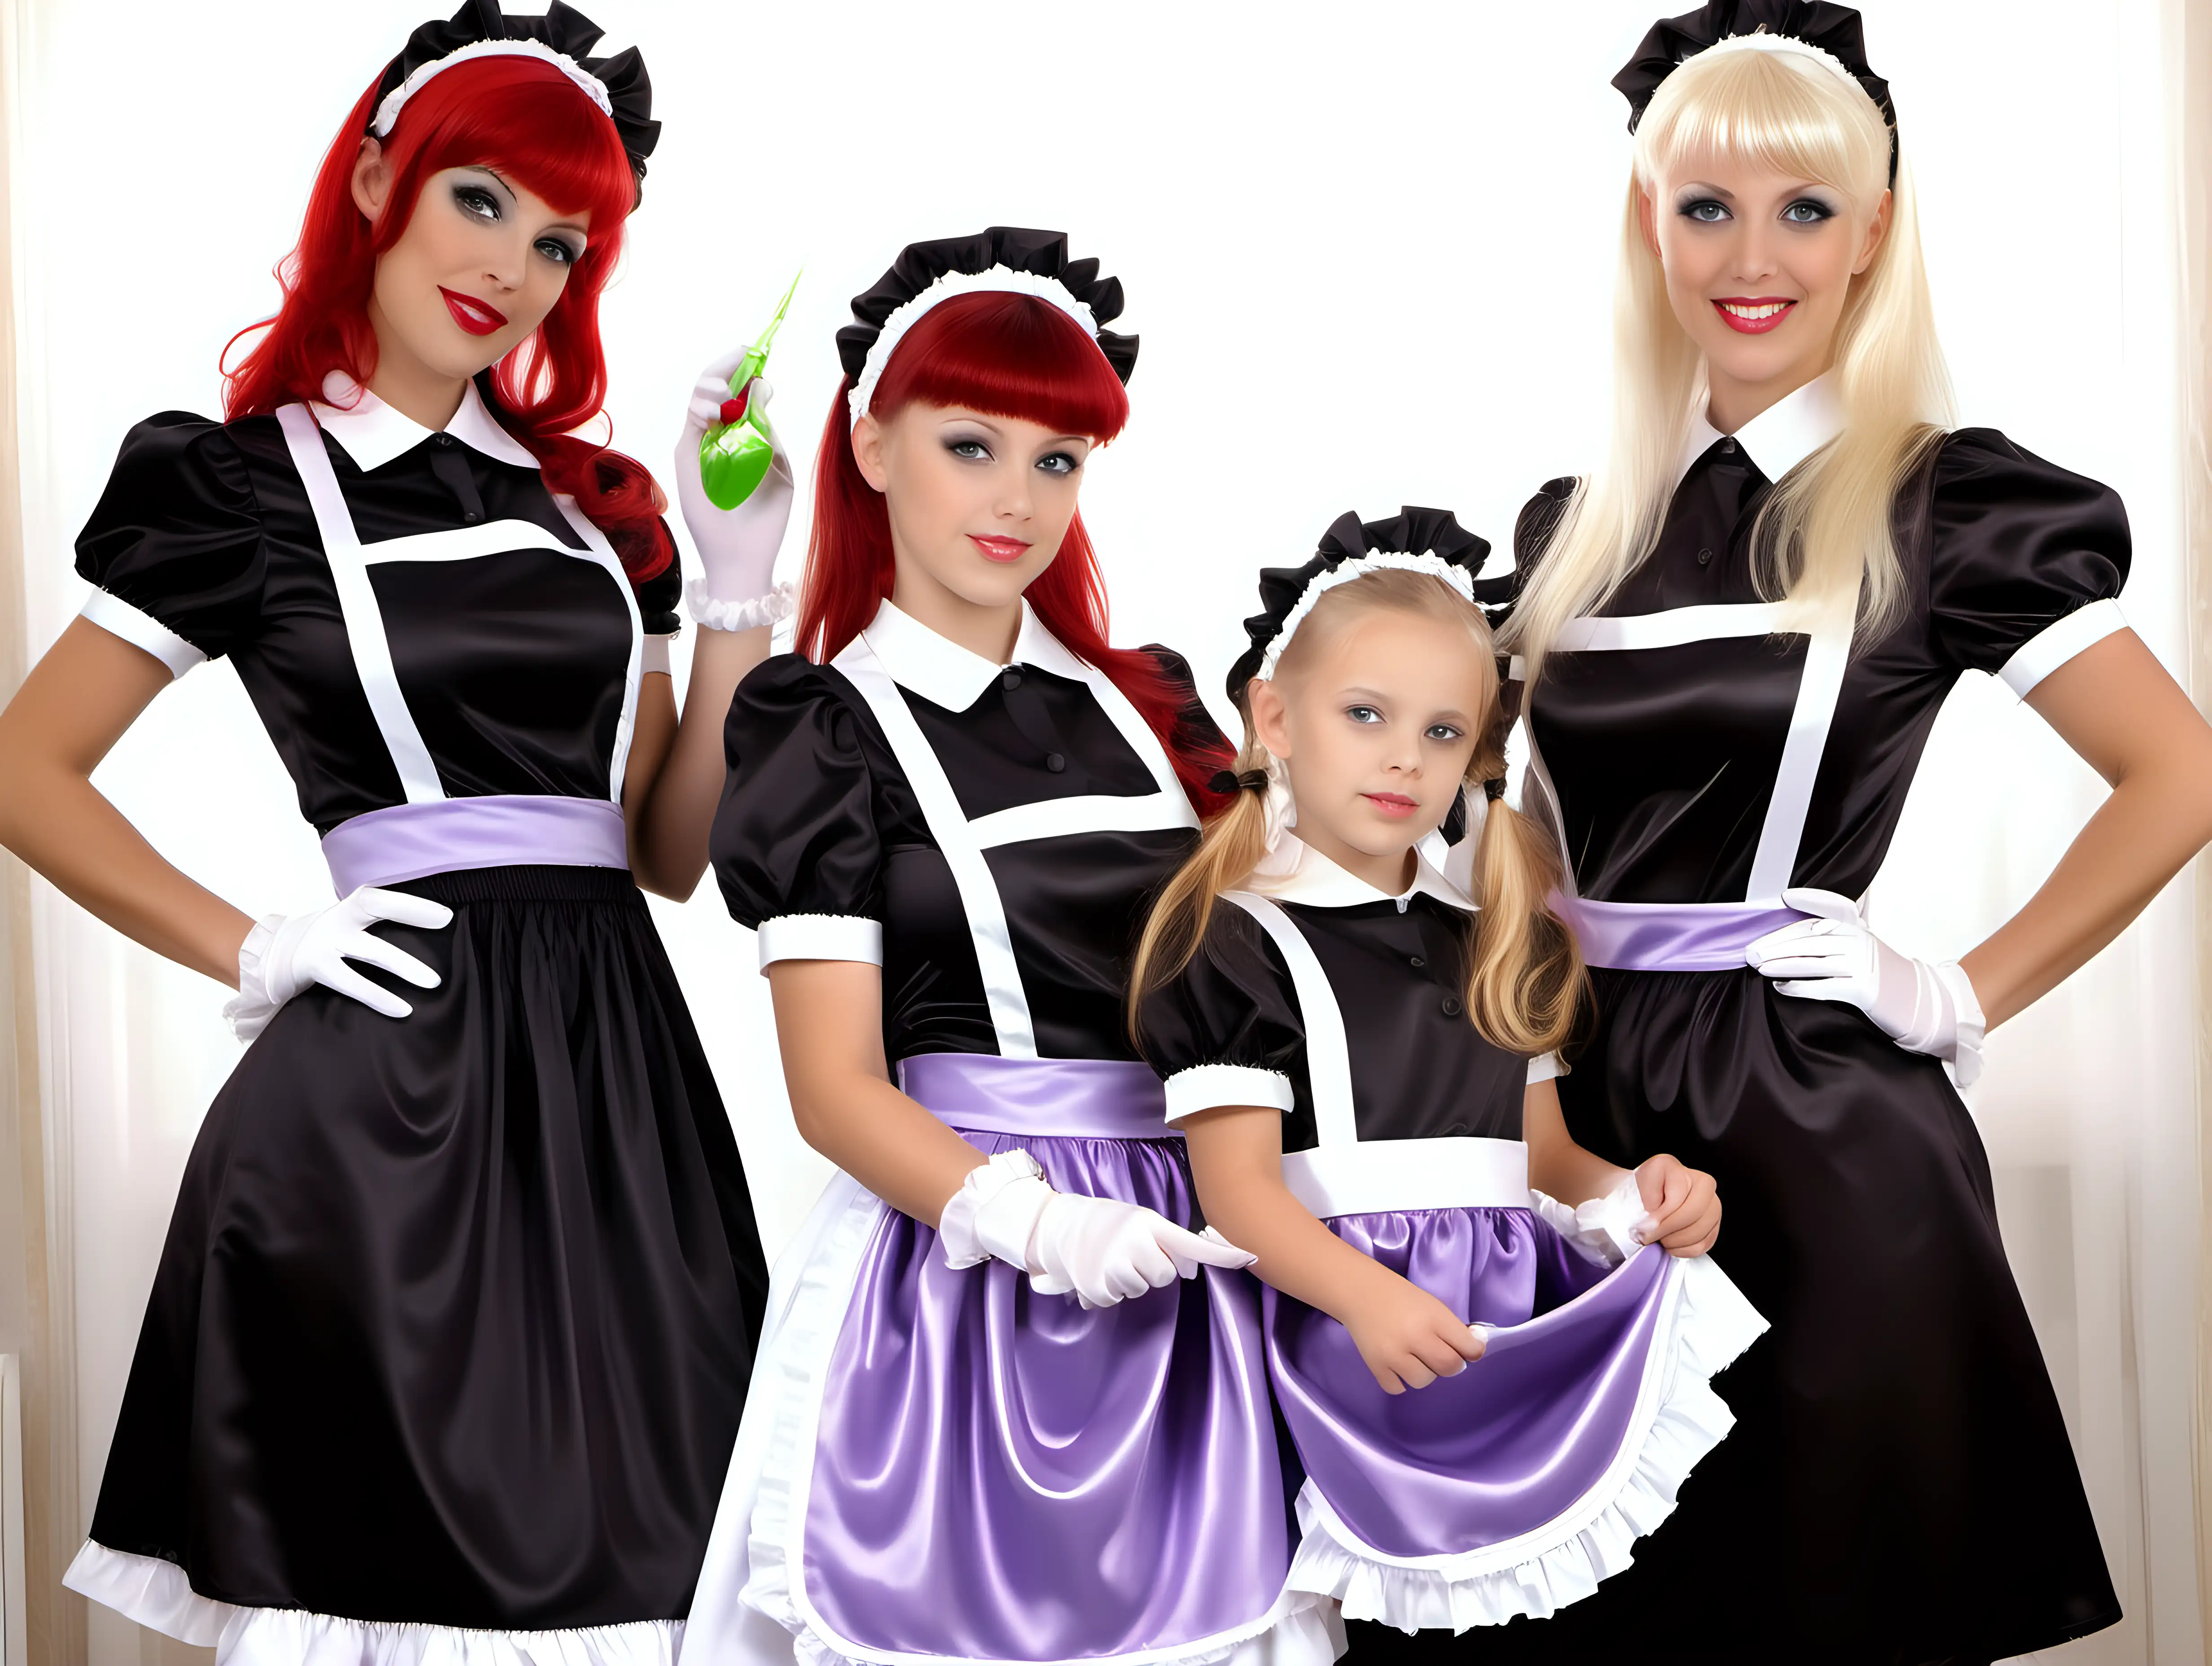 litle girls in long crystal satin retro maid lilac black uniforms and milf mothers long blonde and red hair,black hair